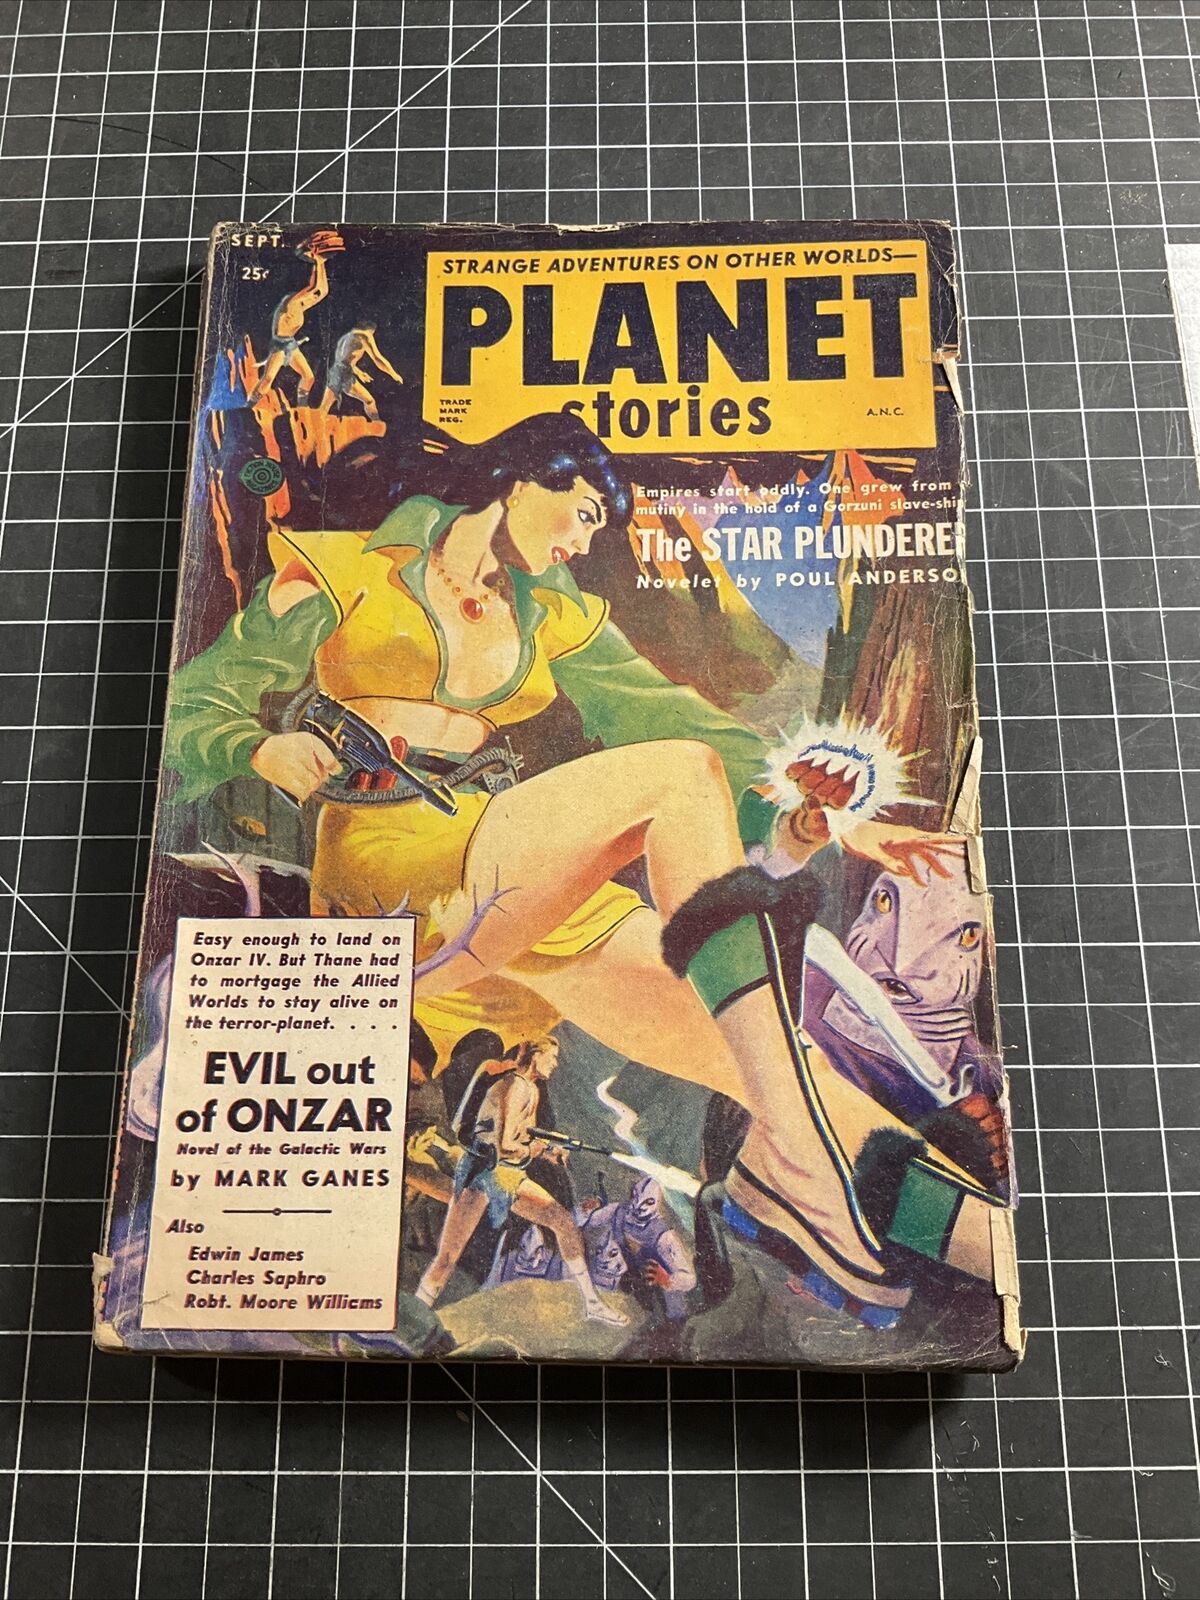 Planet Stories 1952 September. Contains The Gun by Philip K. Dick.